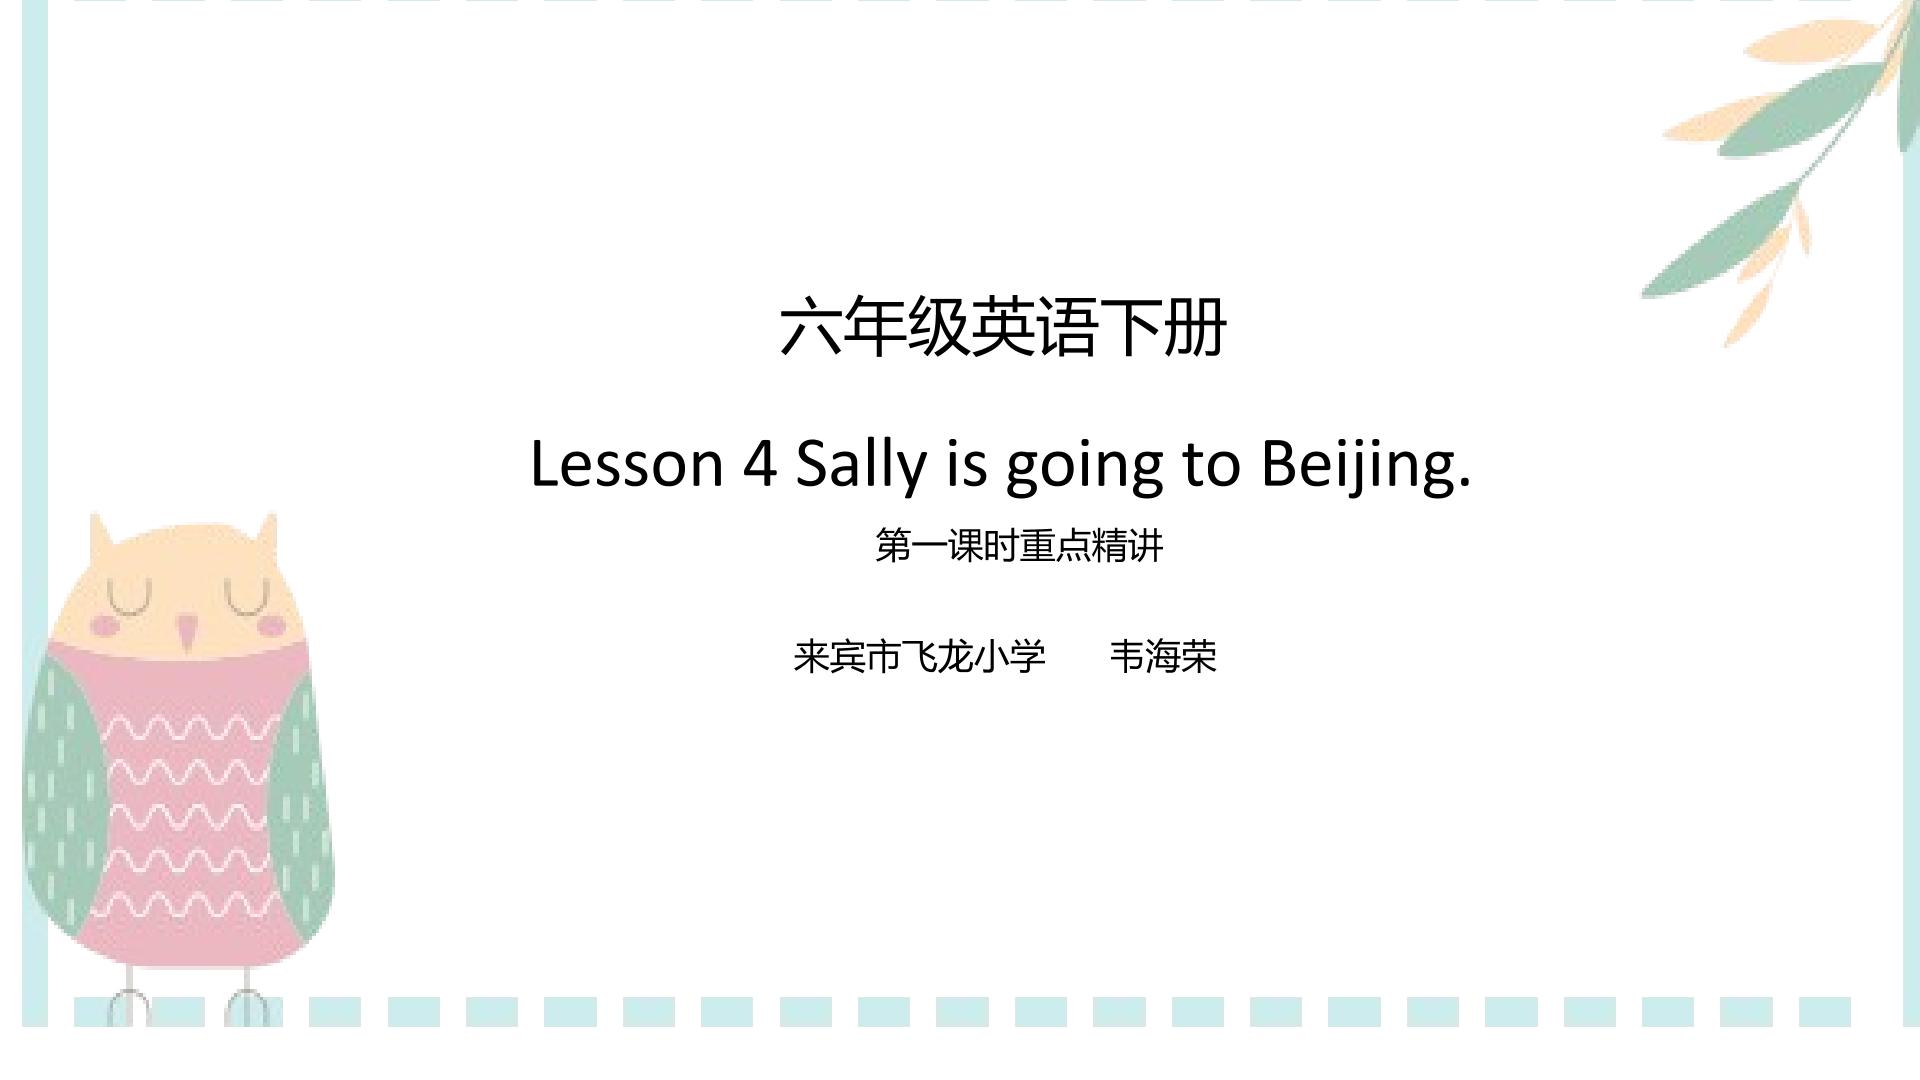 Lesson 4 Sally is going to Beijing.